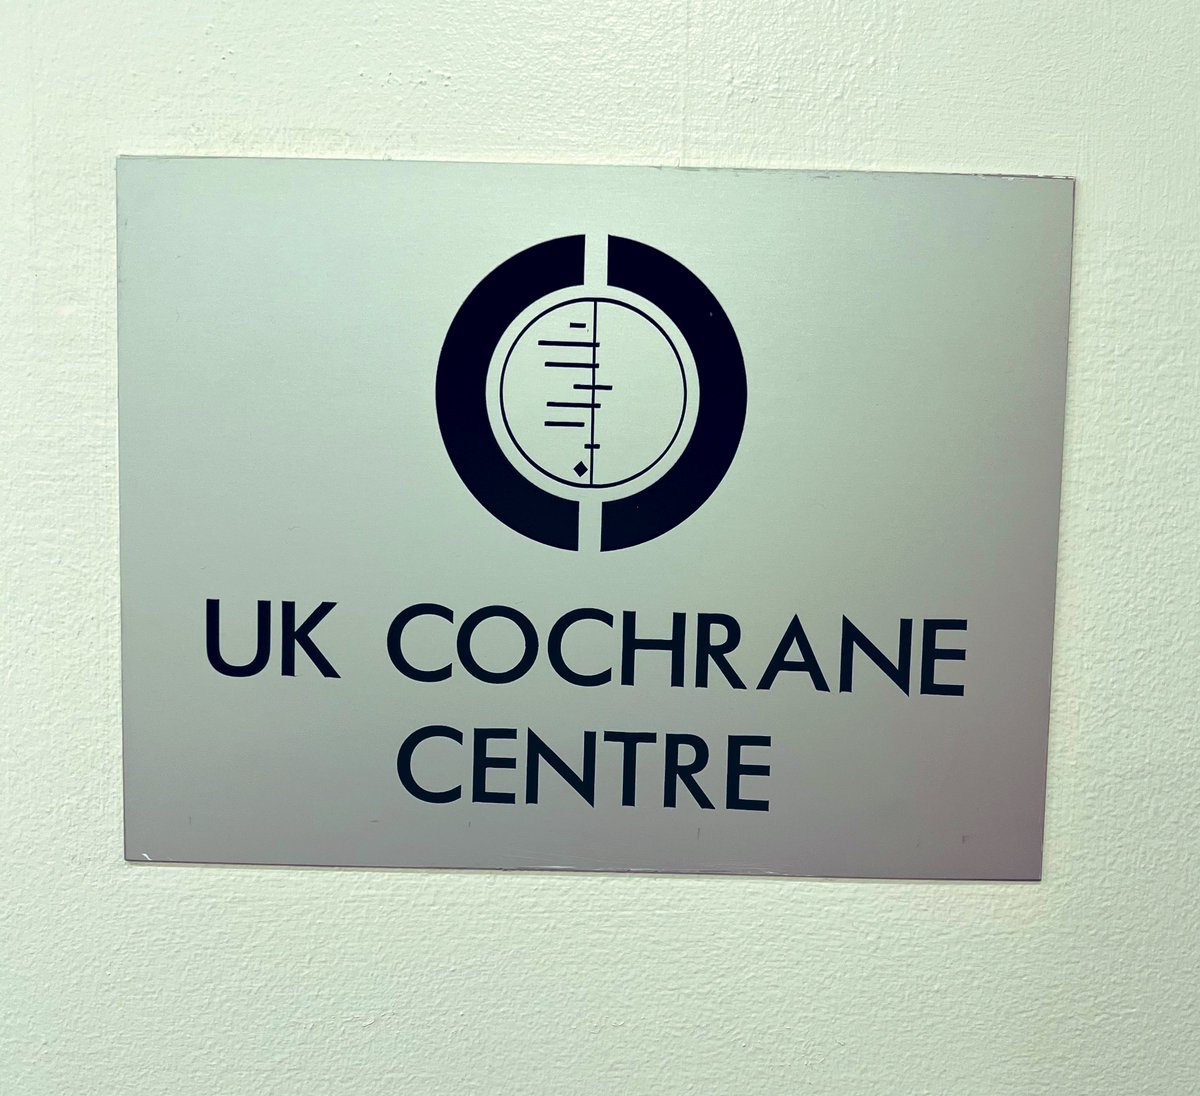 Well today we closed the doors on @CochraneUK for the last time. It finished in the building where it all started 30 years ago. What a privilege it’s been to be a member of that fabulous team & work with an array of talented global colleagues. What a sad day.